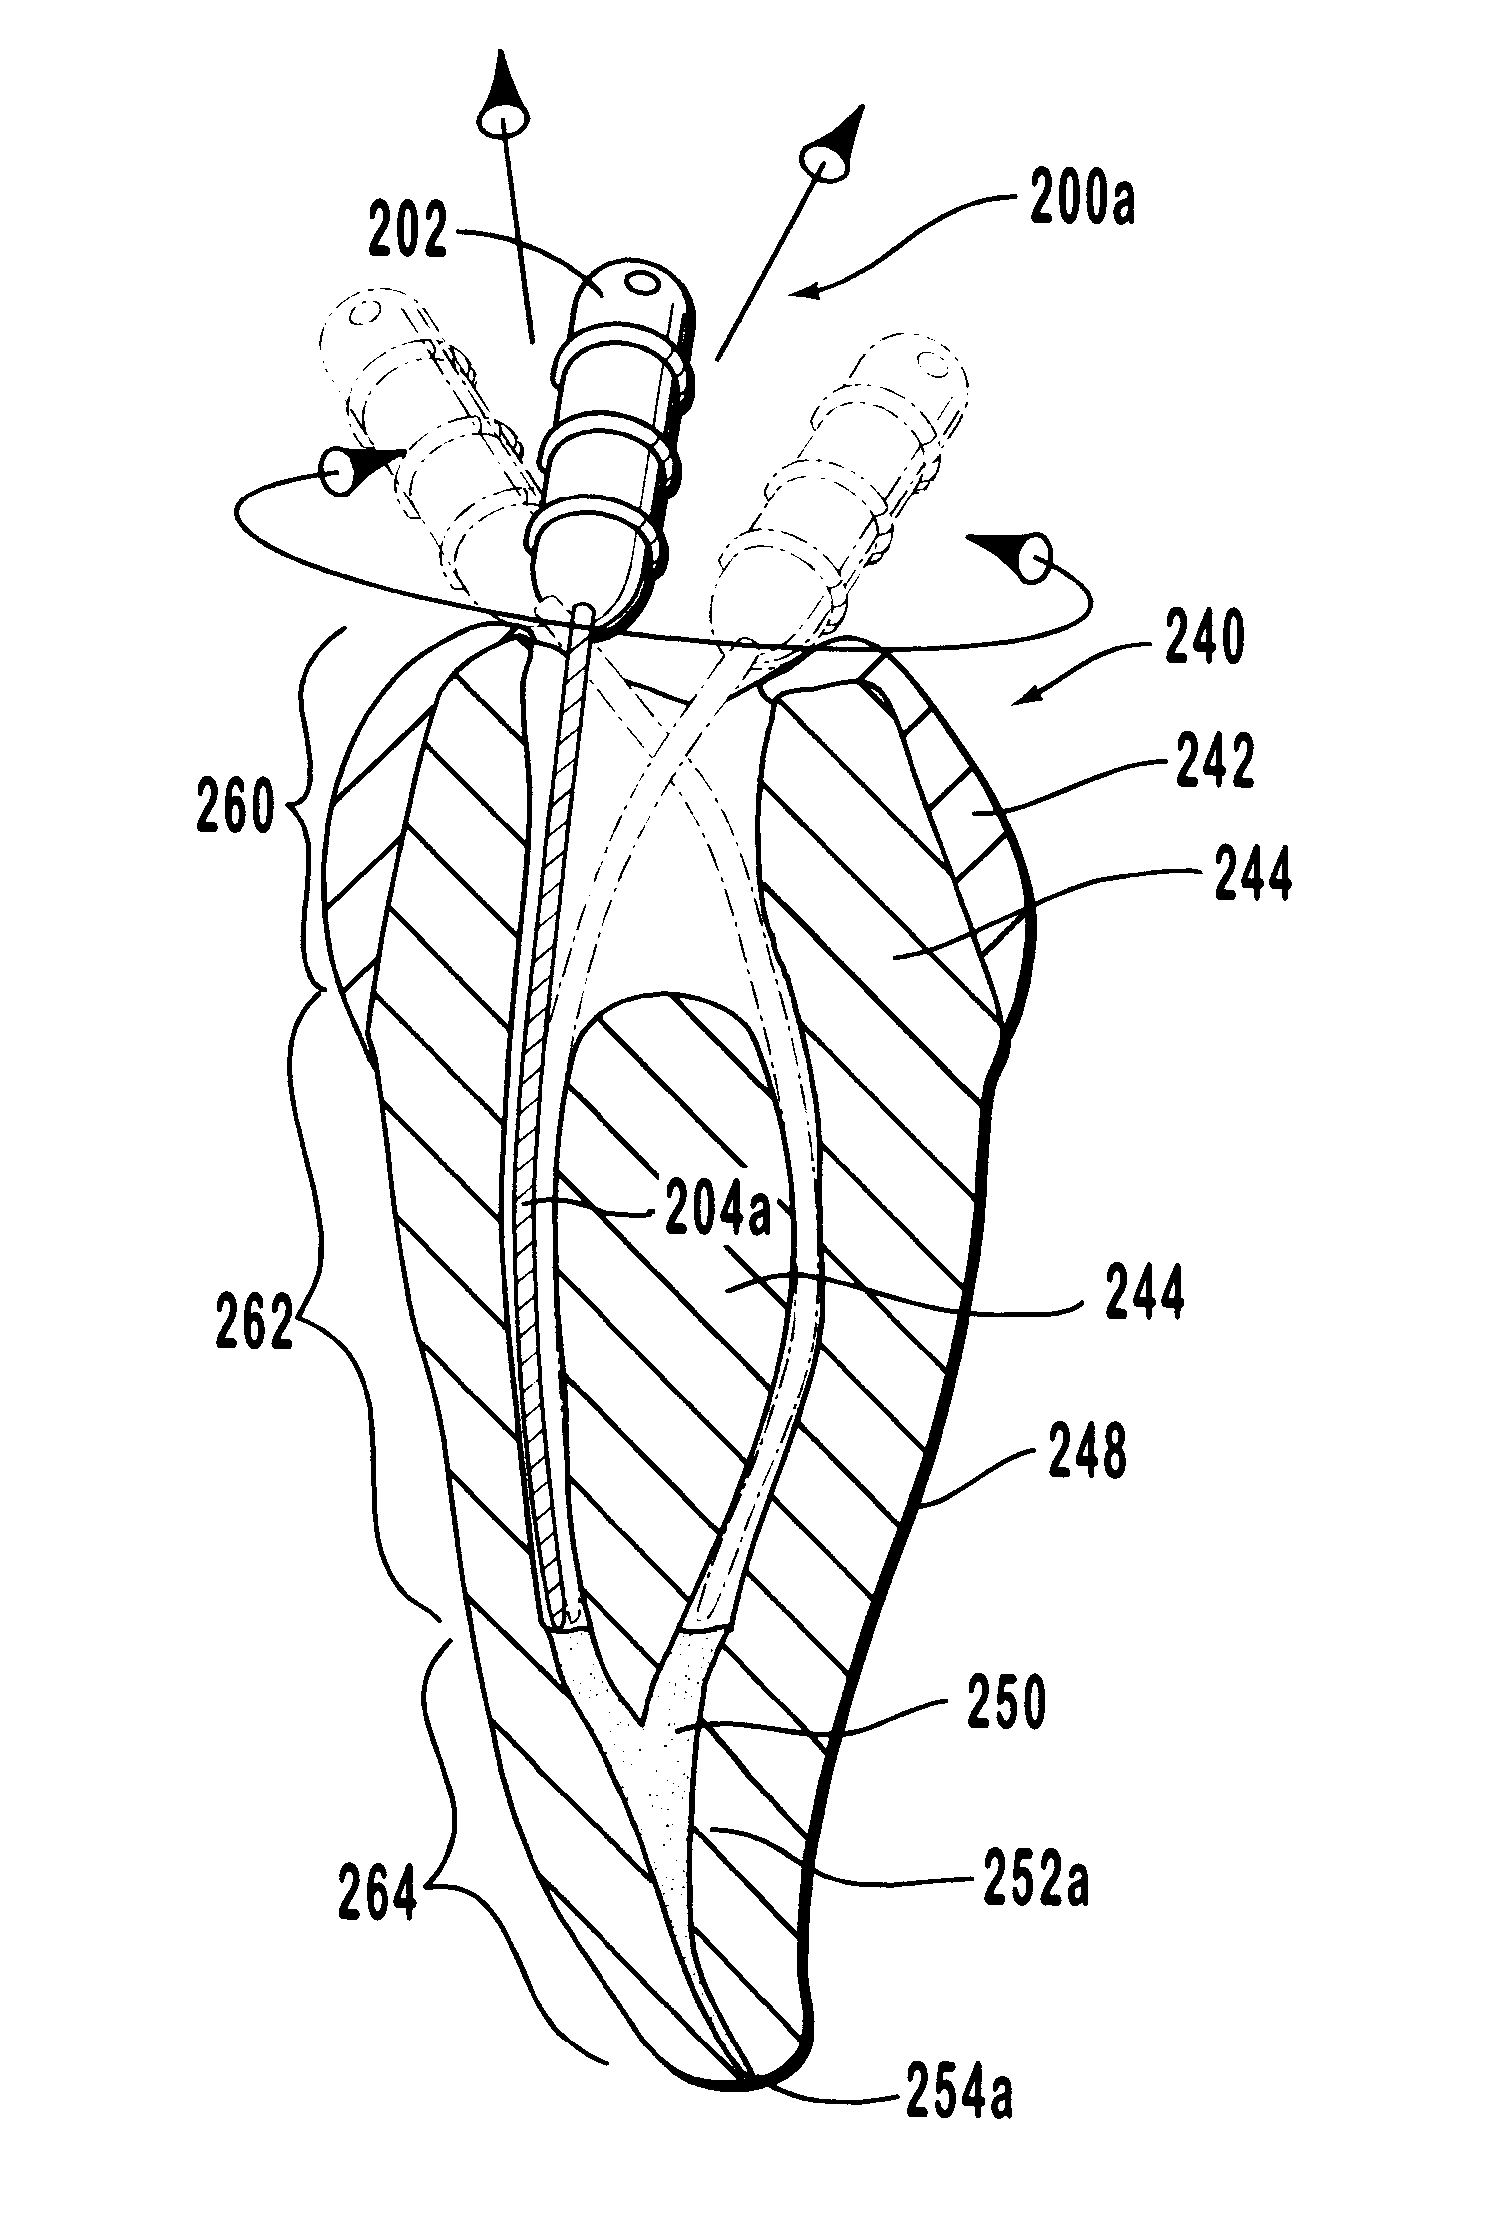 Endodontic systems and methods for the anatomical, sectional and progressive corono-apical preparation of root canals with instruments utilizing stops